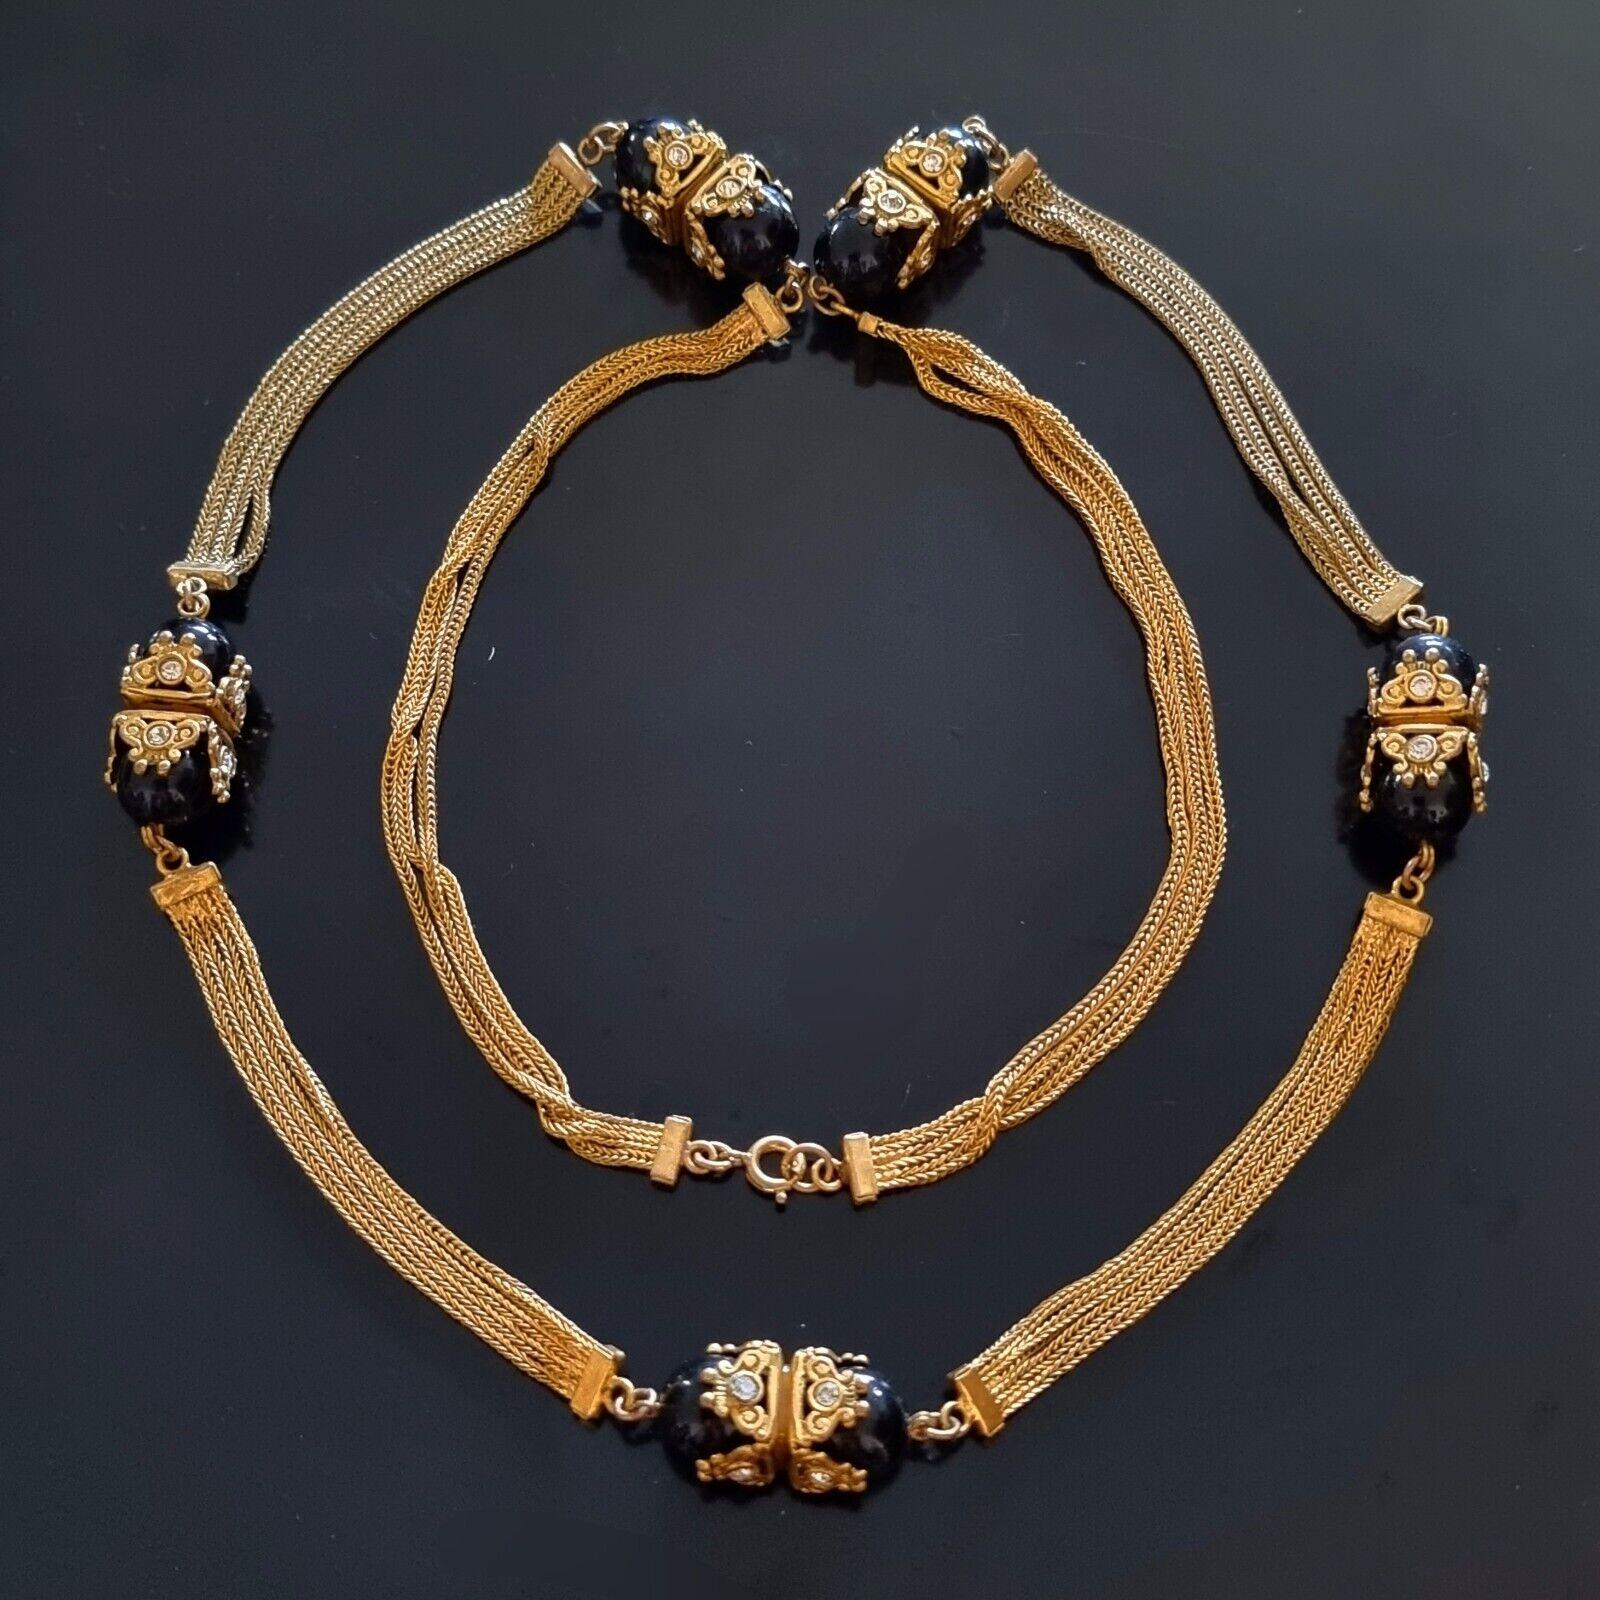 Magnificent LONG NECKLACE in Byzantine jet and faux pearls, rhinestones,
vintage from the 50s,
Robert Goossens for Chanel,
length 89 cm, weight 64 g,
very good state.

Robert Goossens was born in 1927 in Paris. His mother is employed in a theater